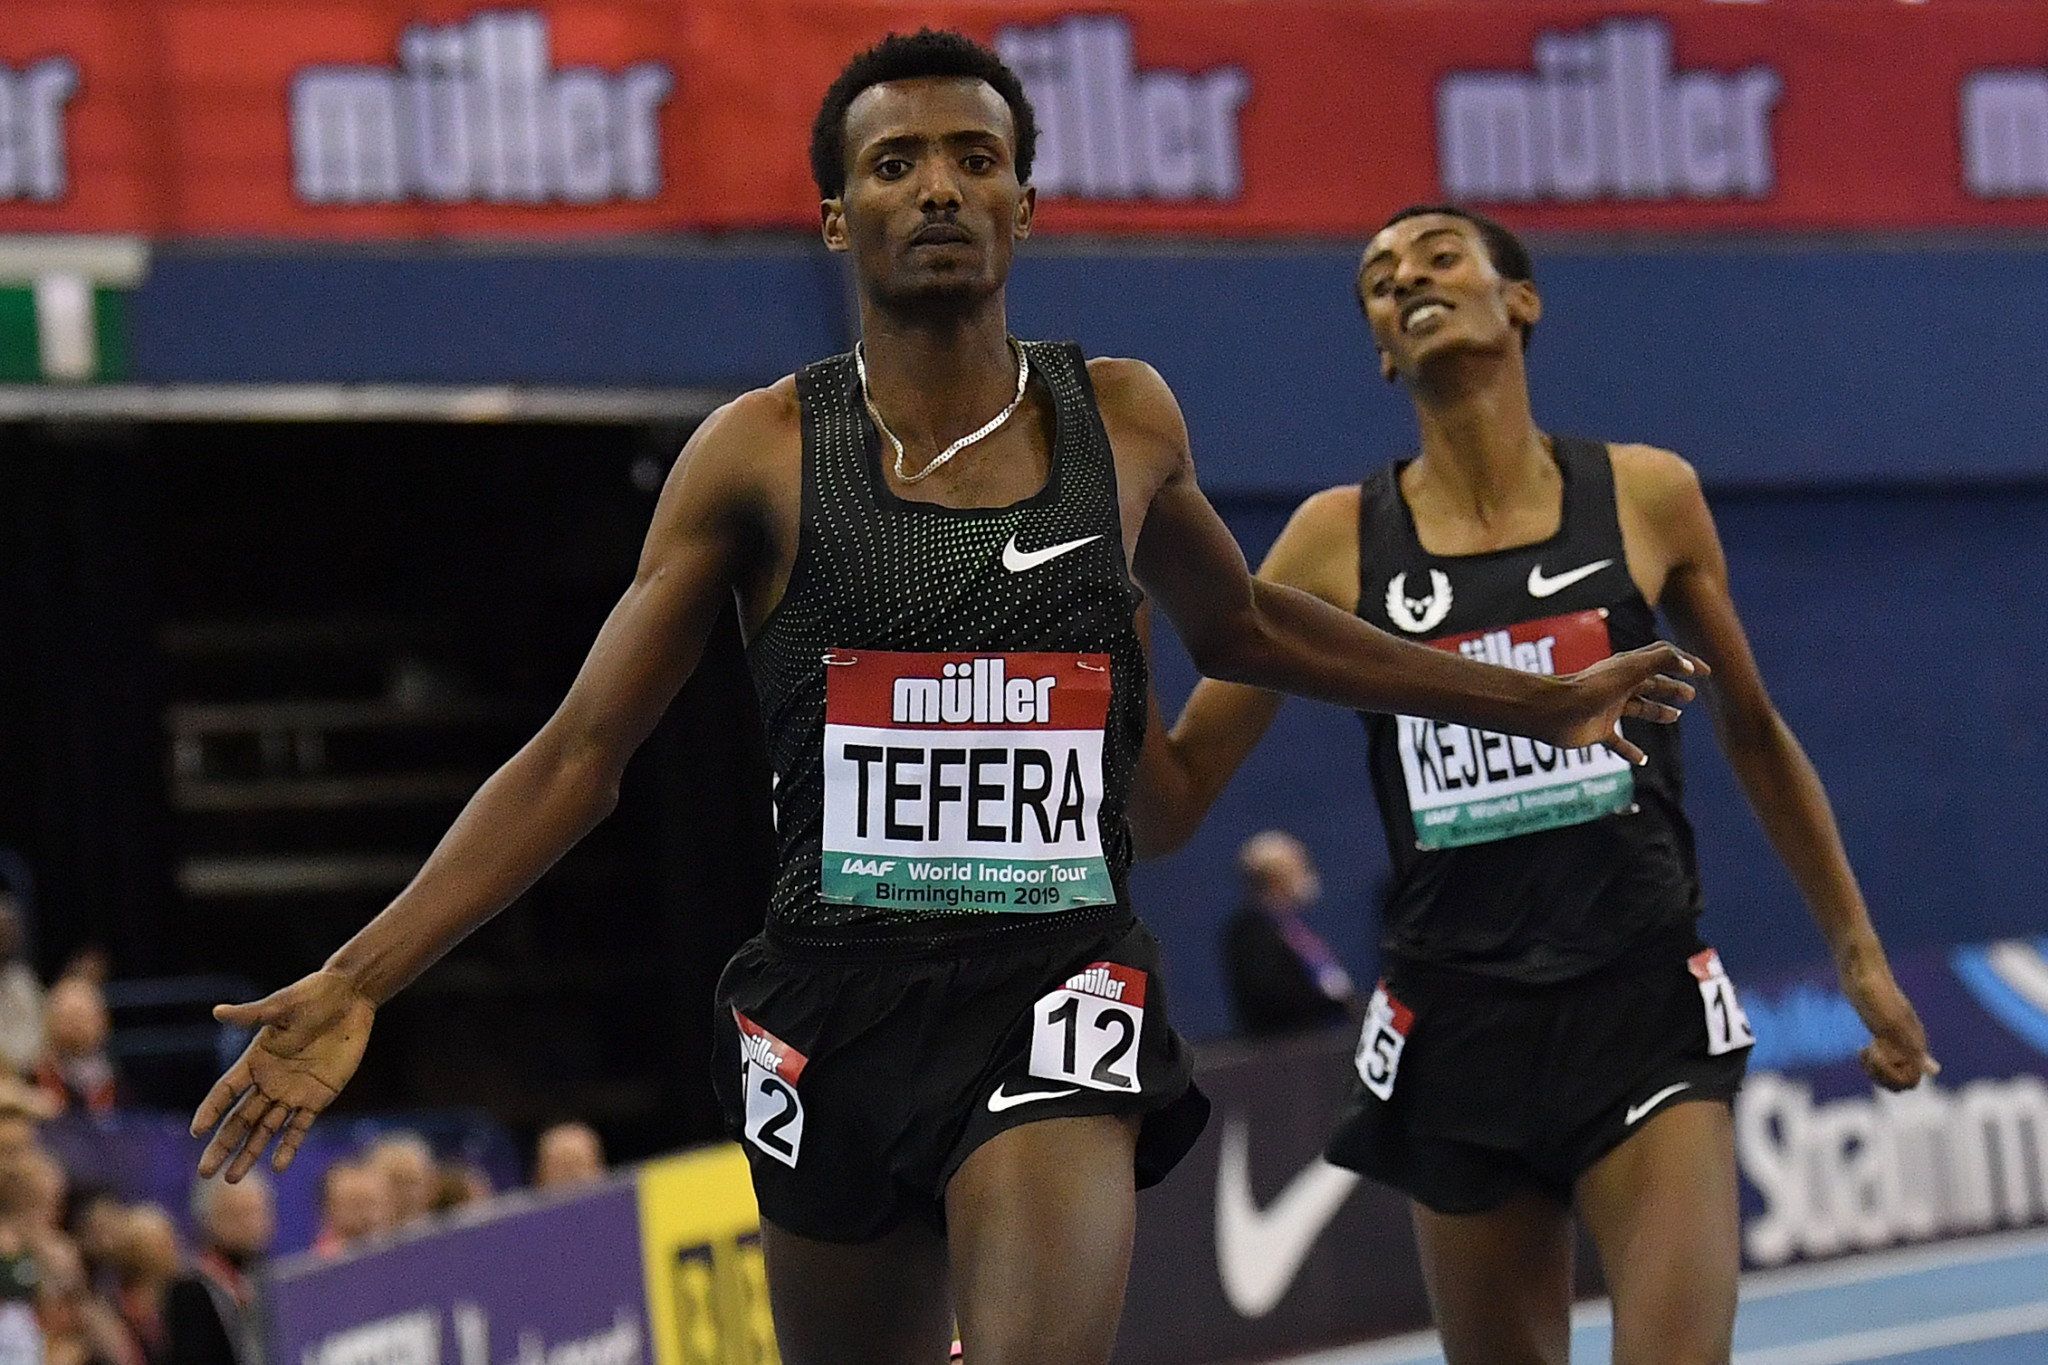 Yomif Kejelcha was beaten to the world indoor 1,500m record by fellow Ethiopian Samuel Tefera in Birmingham last month ©Getty Images